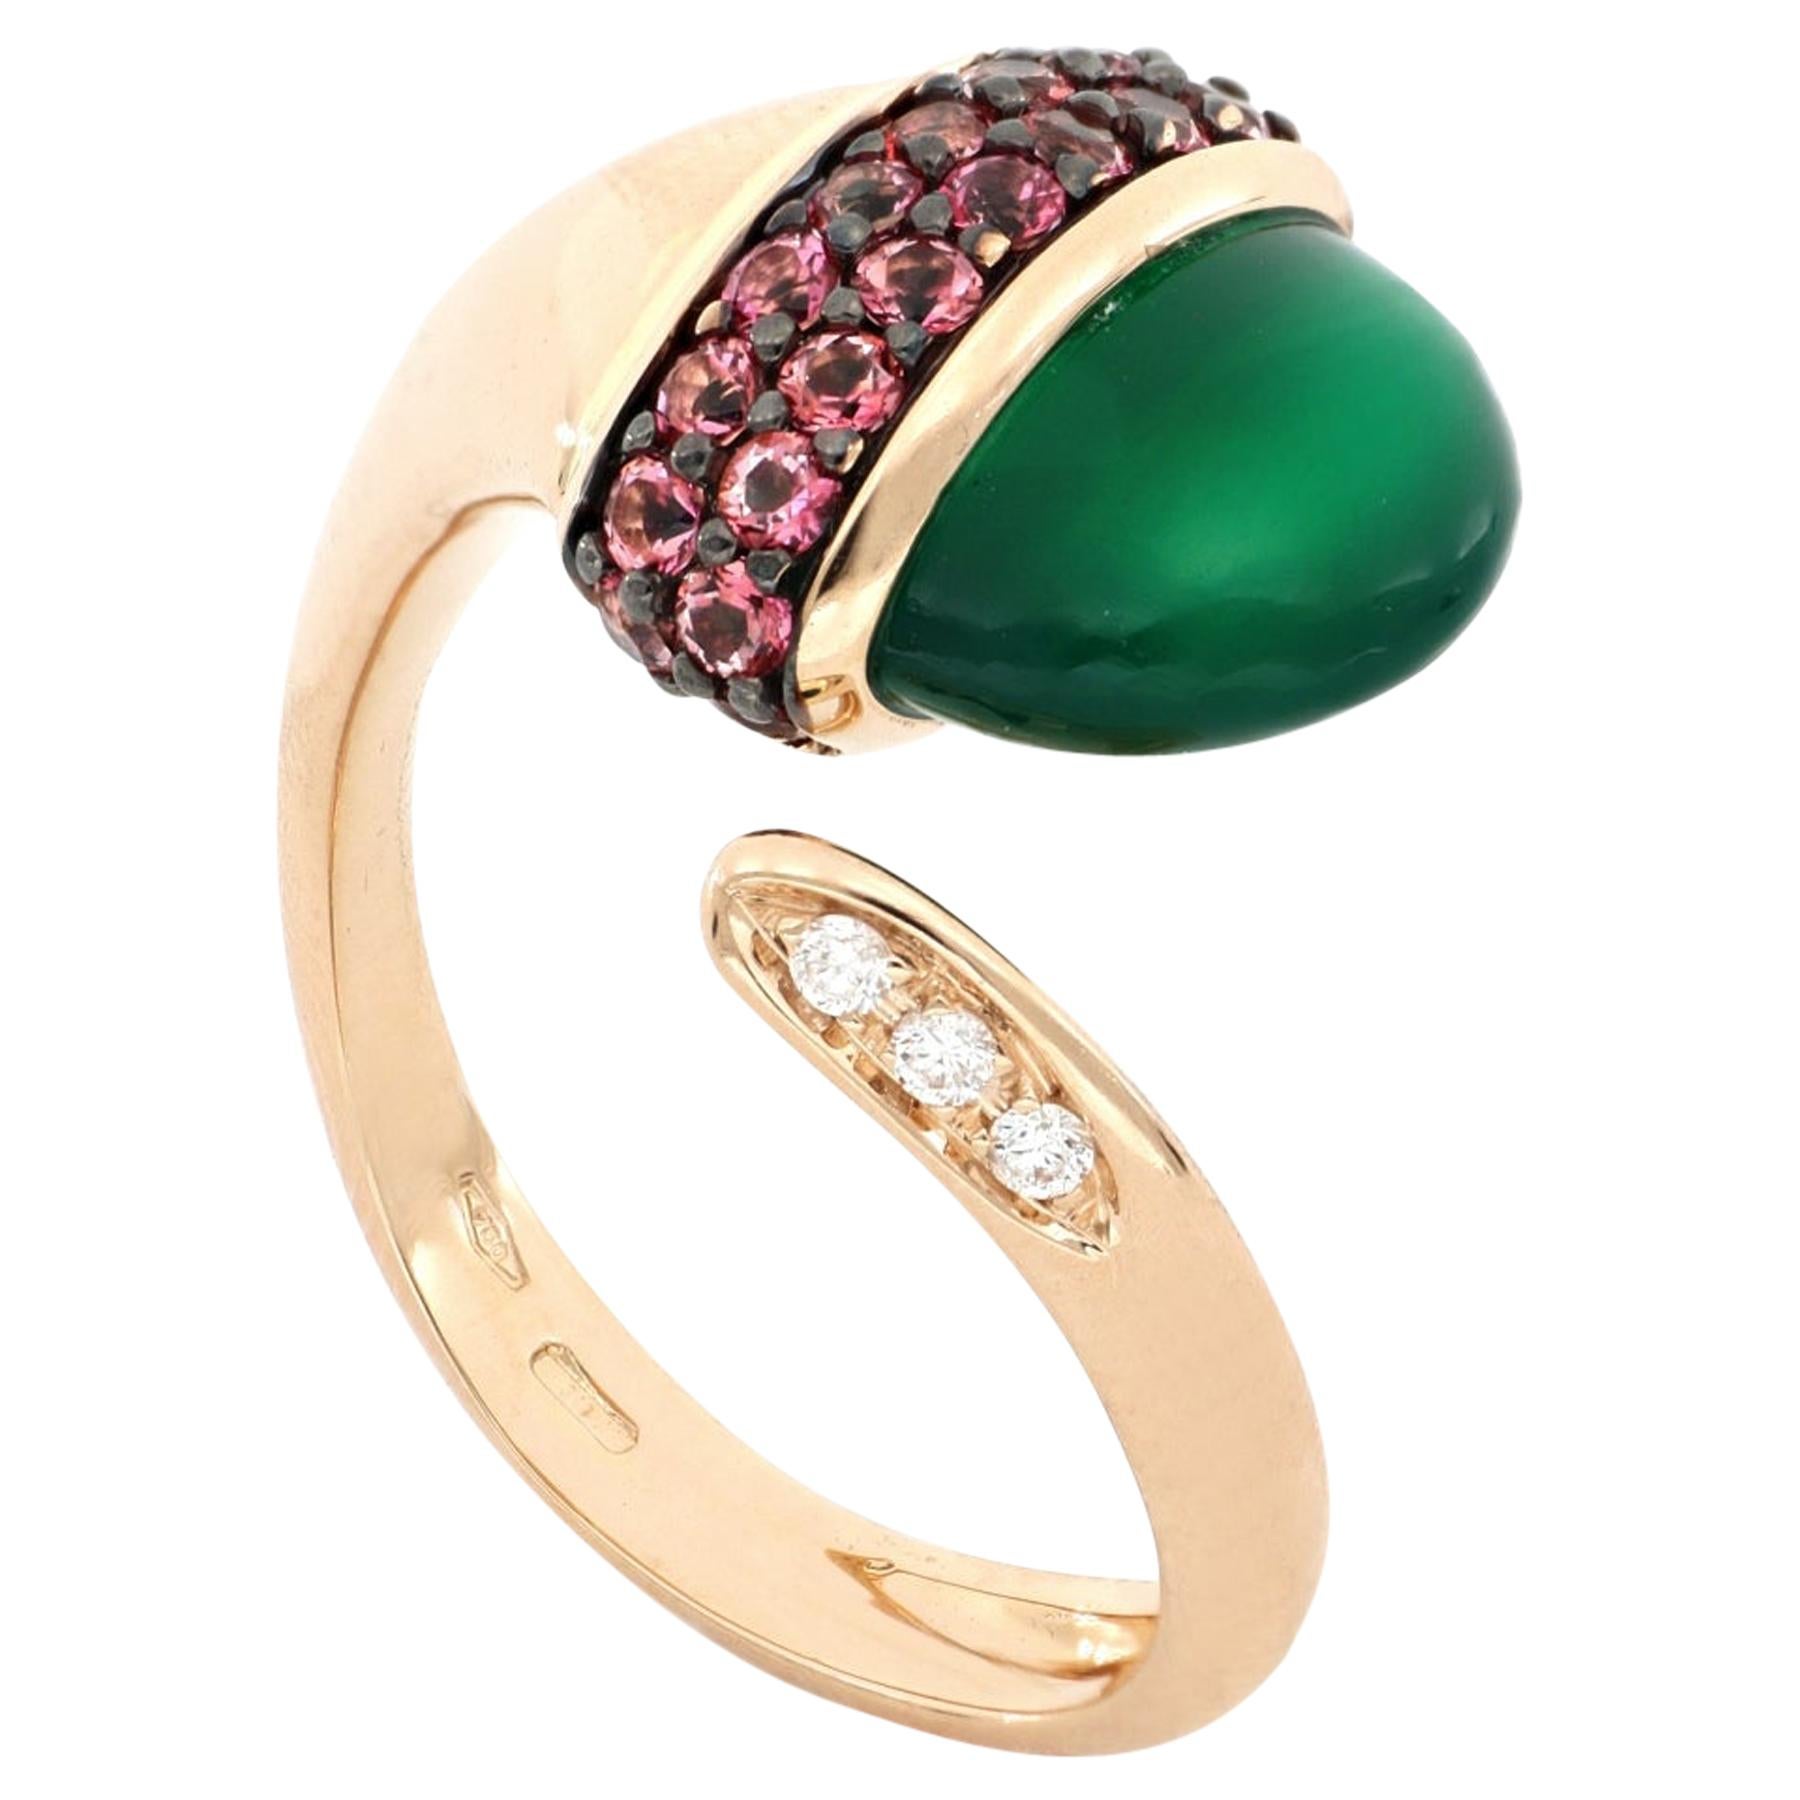 For Sale:  18kt Rose Gold Les Bois Open Ring with Green Onix and Blue Topazes